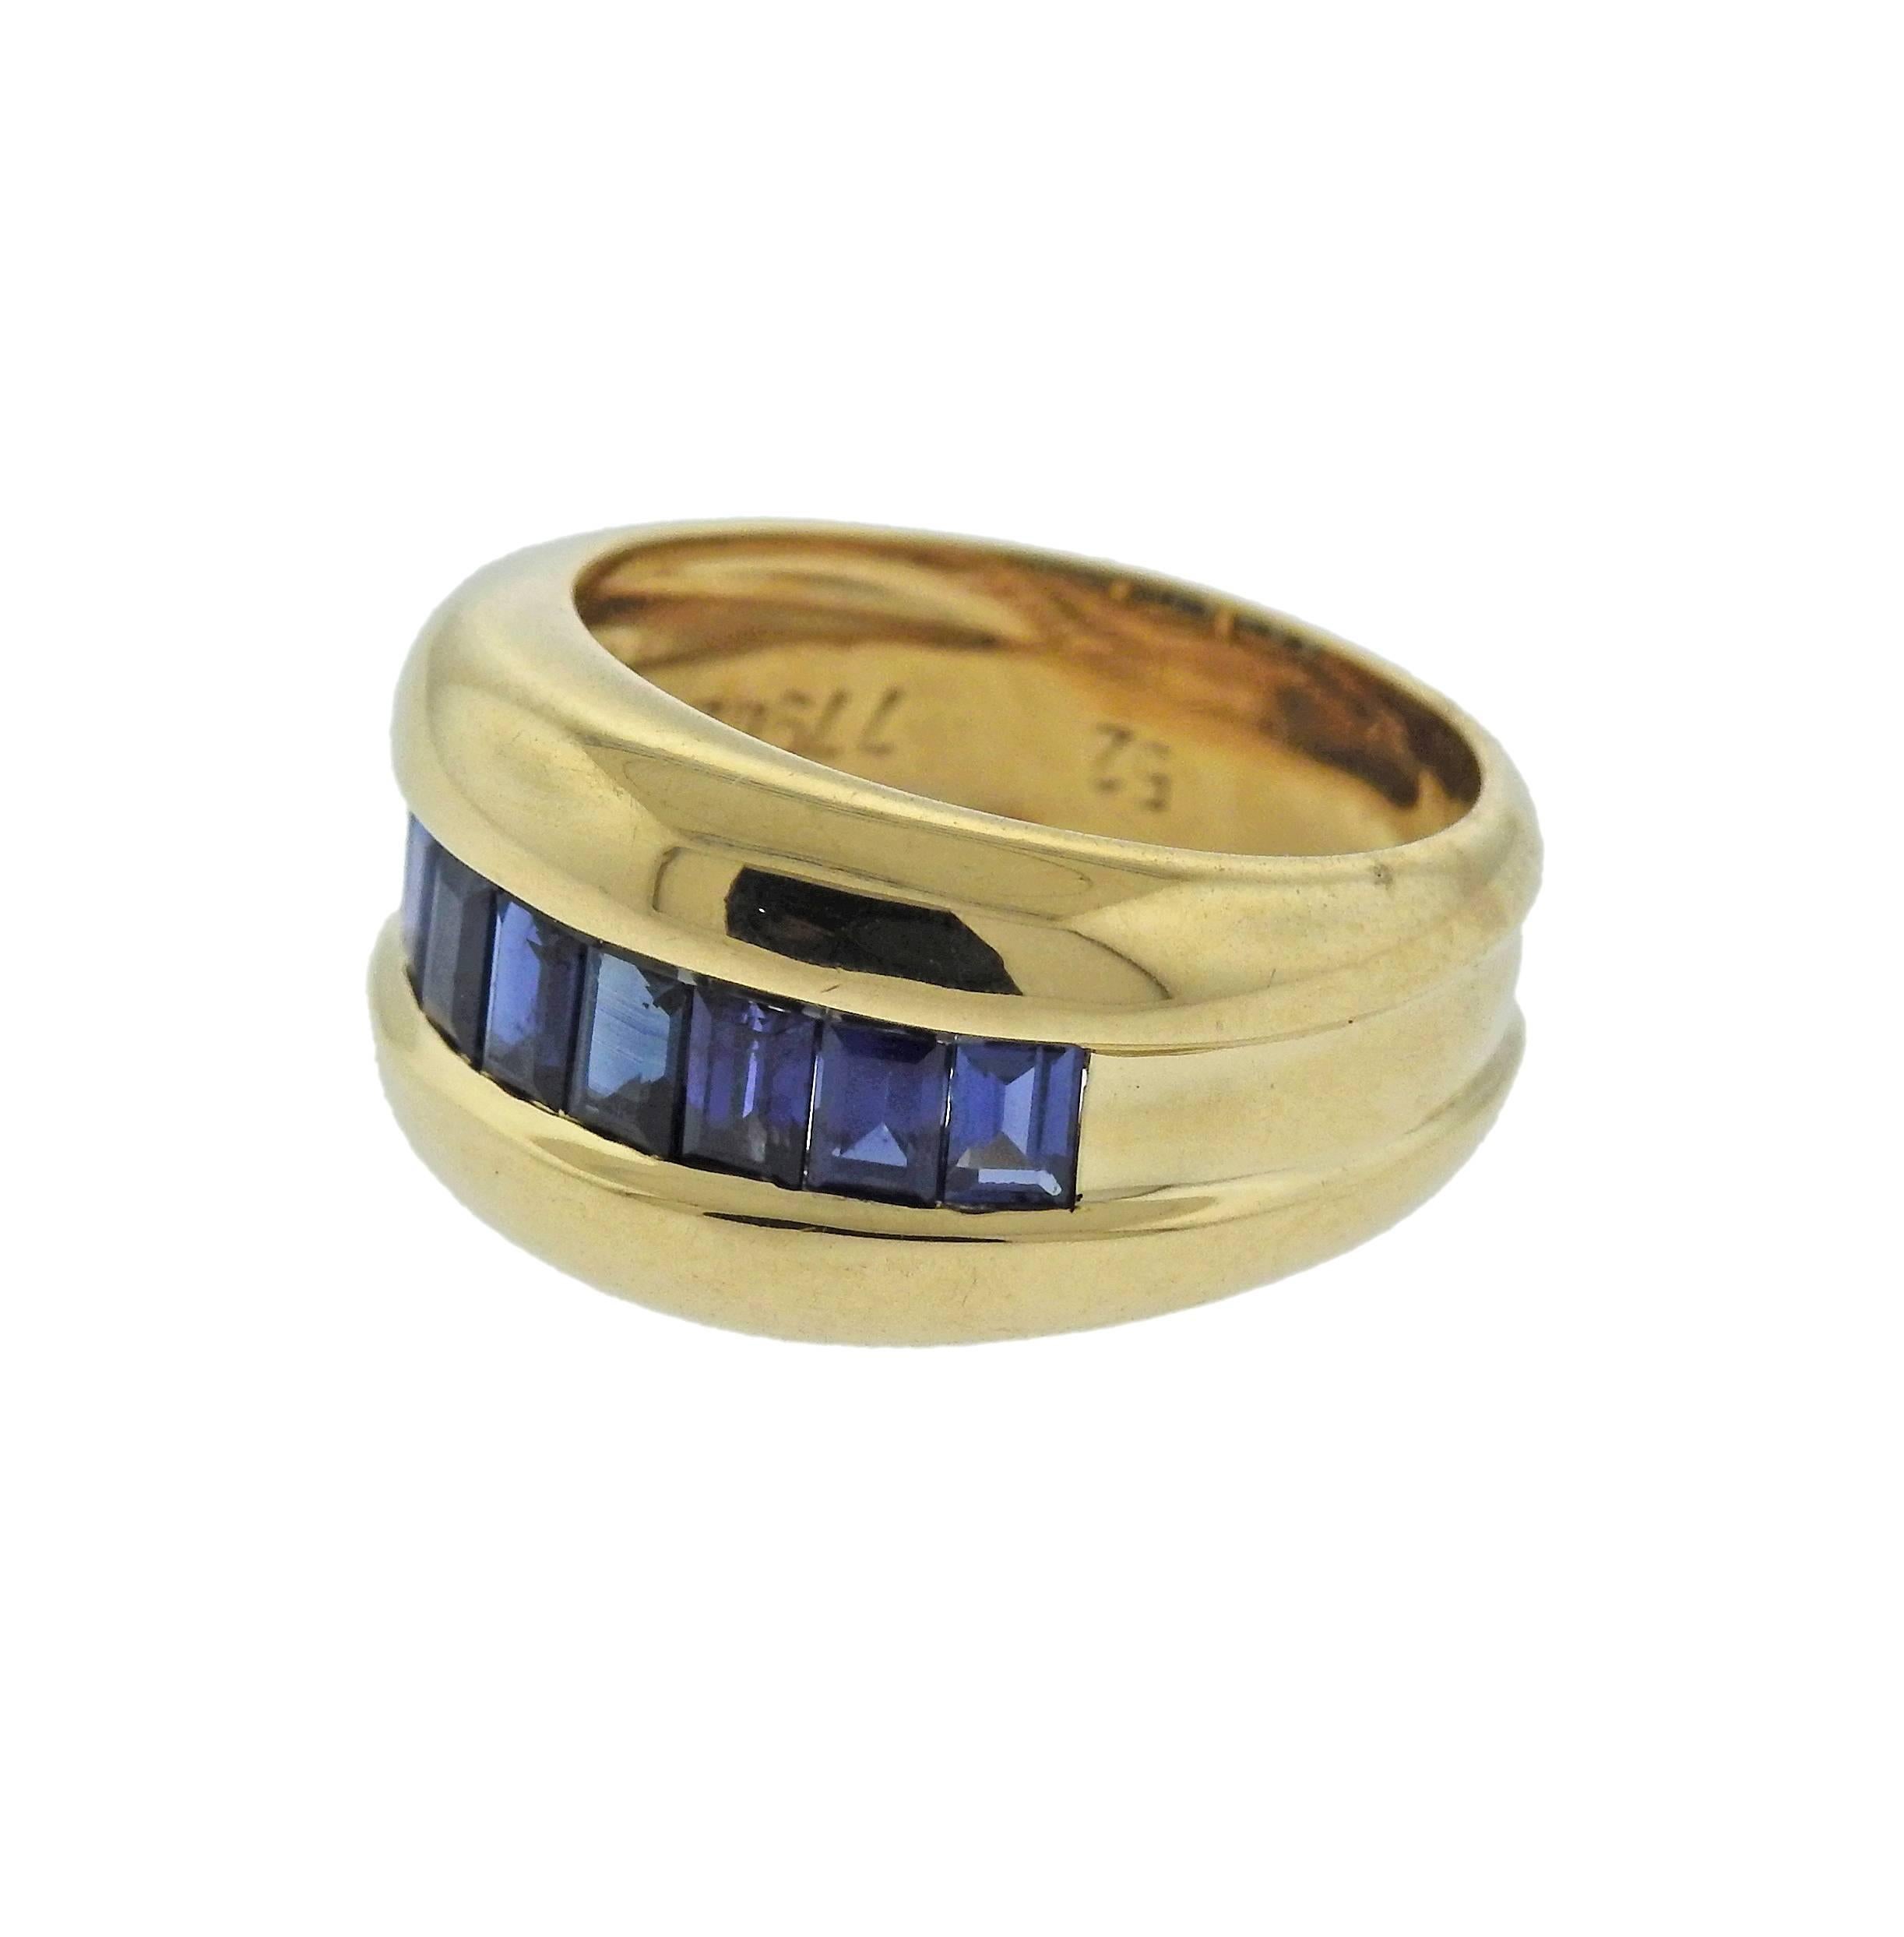 18k yellow gold ring crafted by Cartier featuring baguette cut sapphires. Ring size - 6, ring top is 11mm wide, weighs 8 grams. Marked: Cartier, 52, 779422, 750.